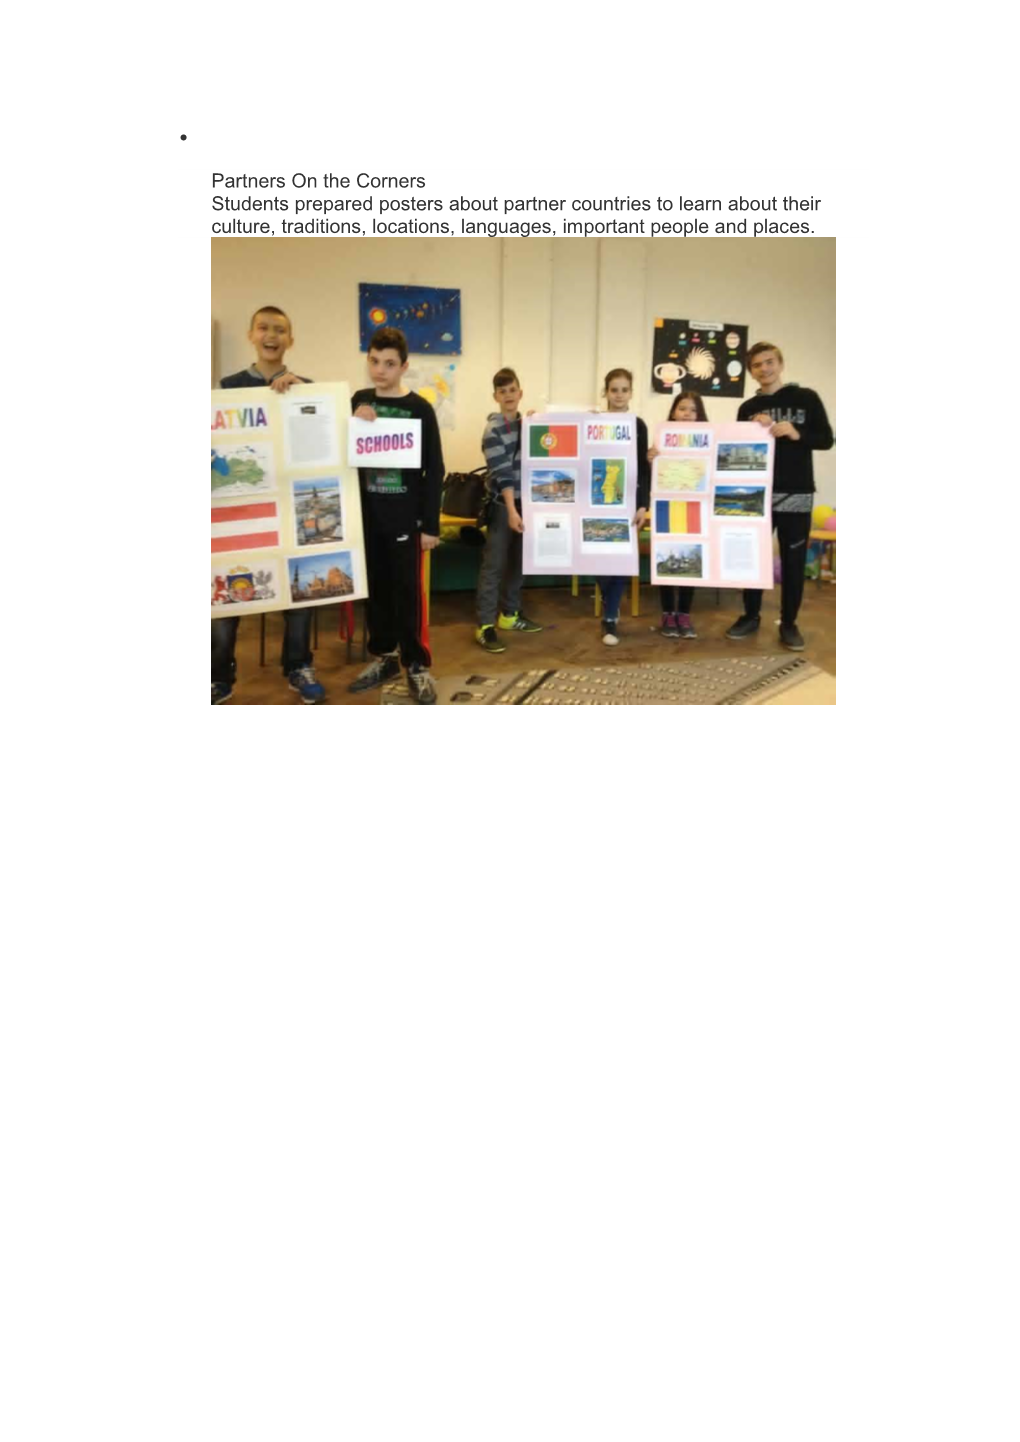 Partners on the Corners Students Prepared Posters About Partner Countries to Learn About Their Culture, Traditions, Locations, Languages, Important People and Places